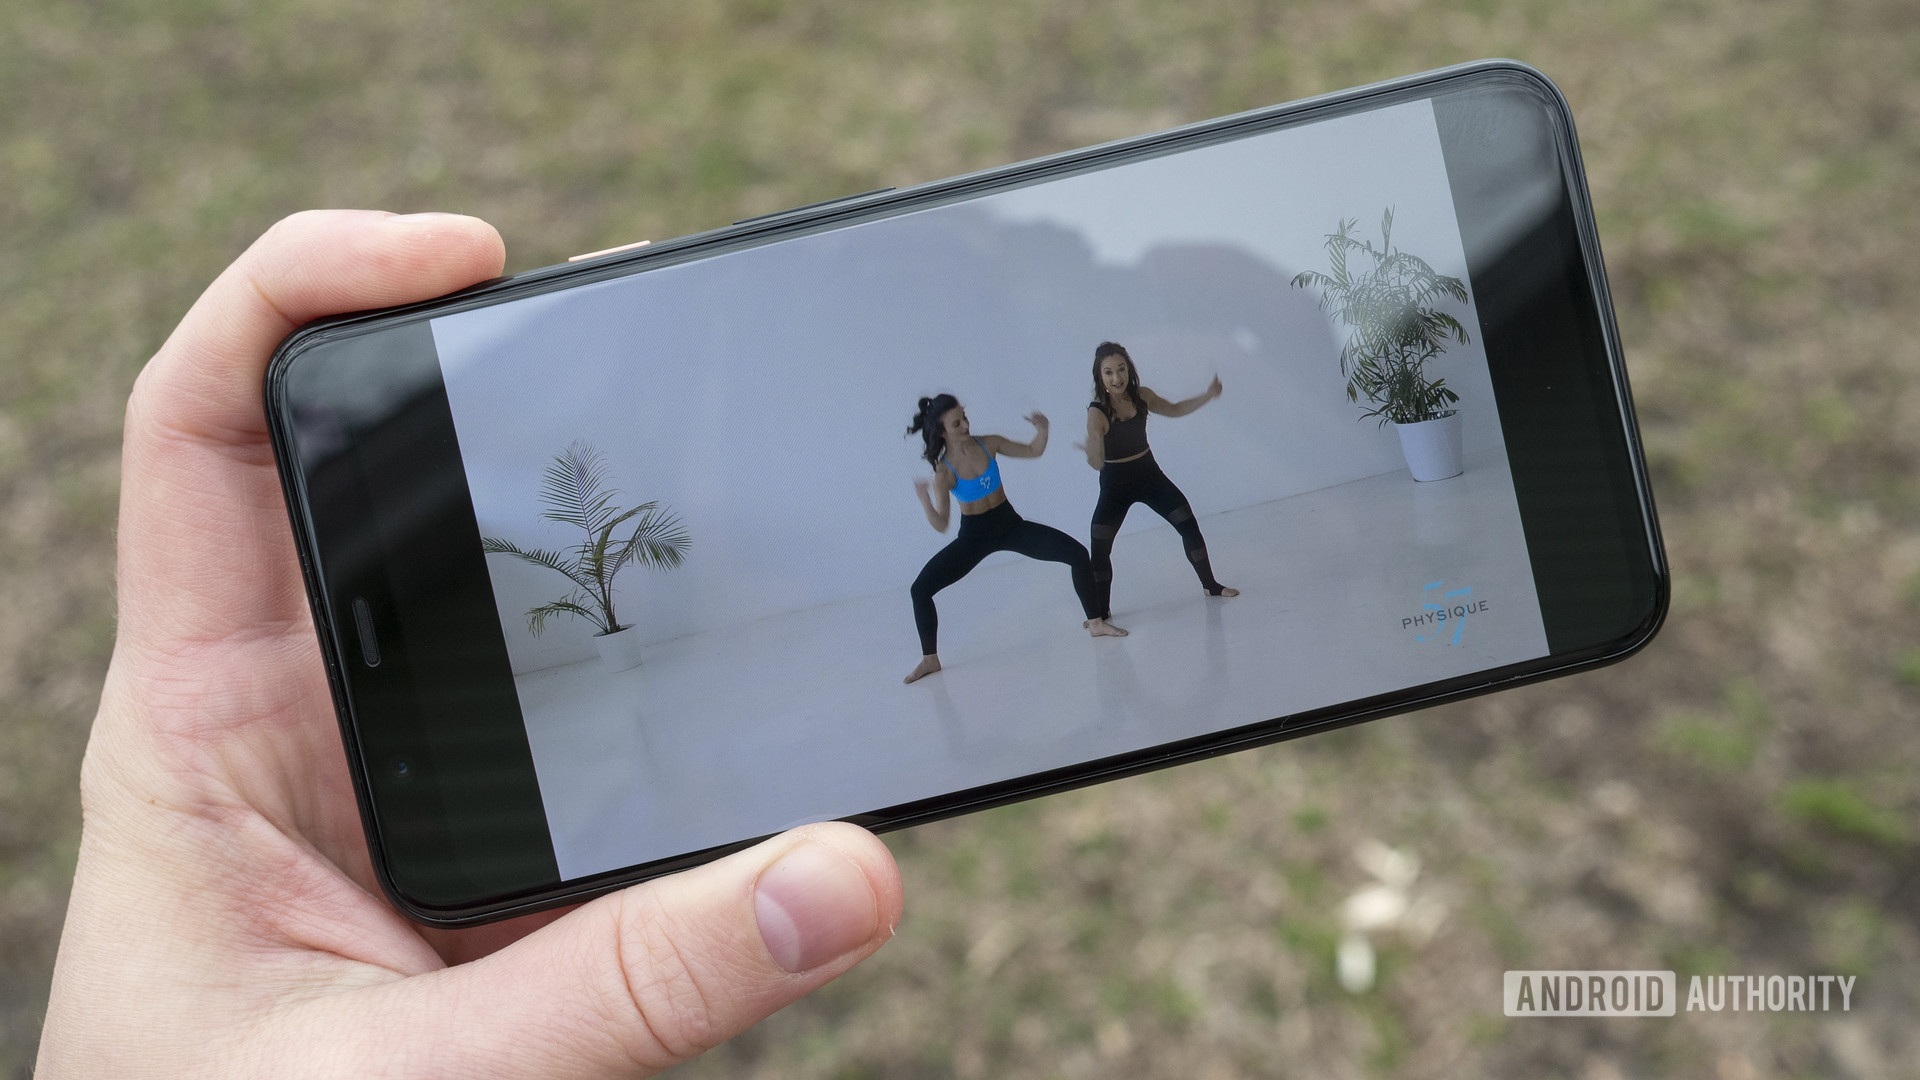 Fitbit Premium custom workouts fitness subscriptions on a smartphone screen